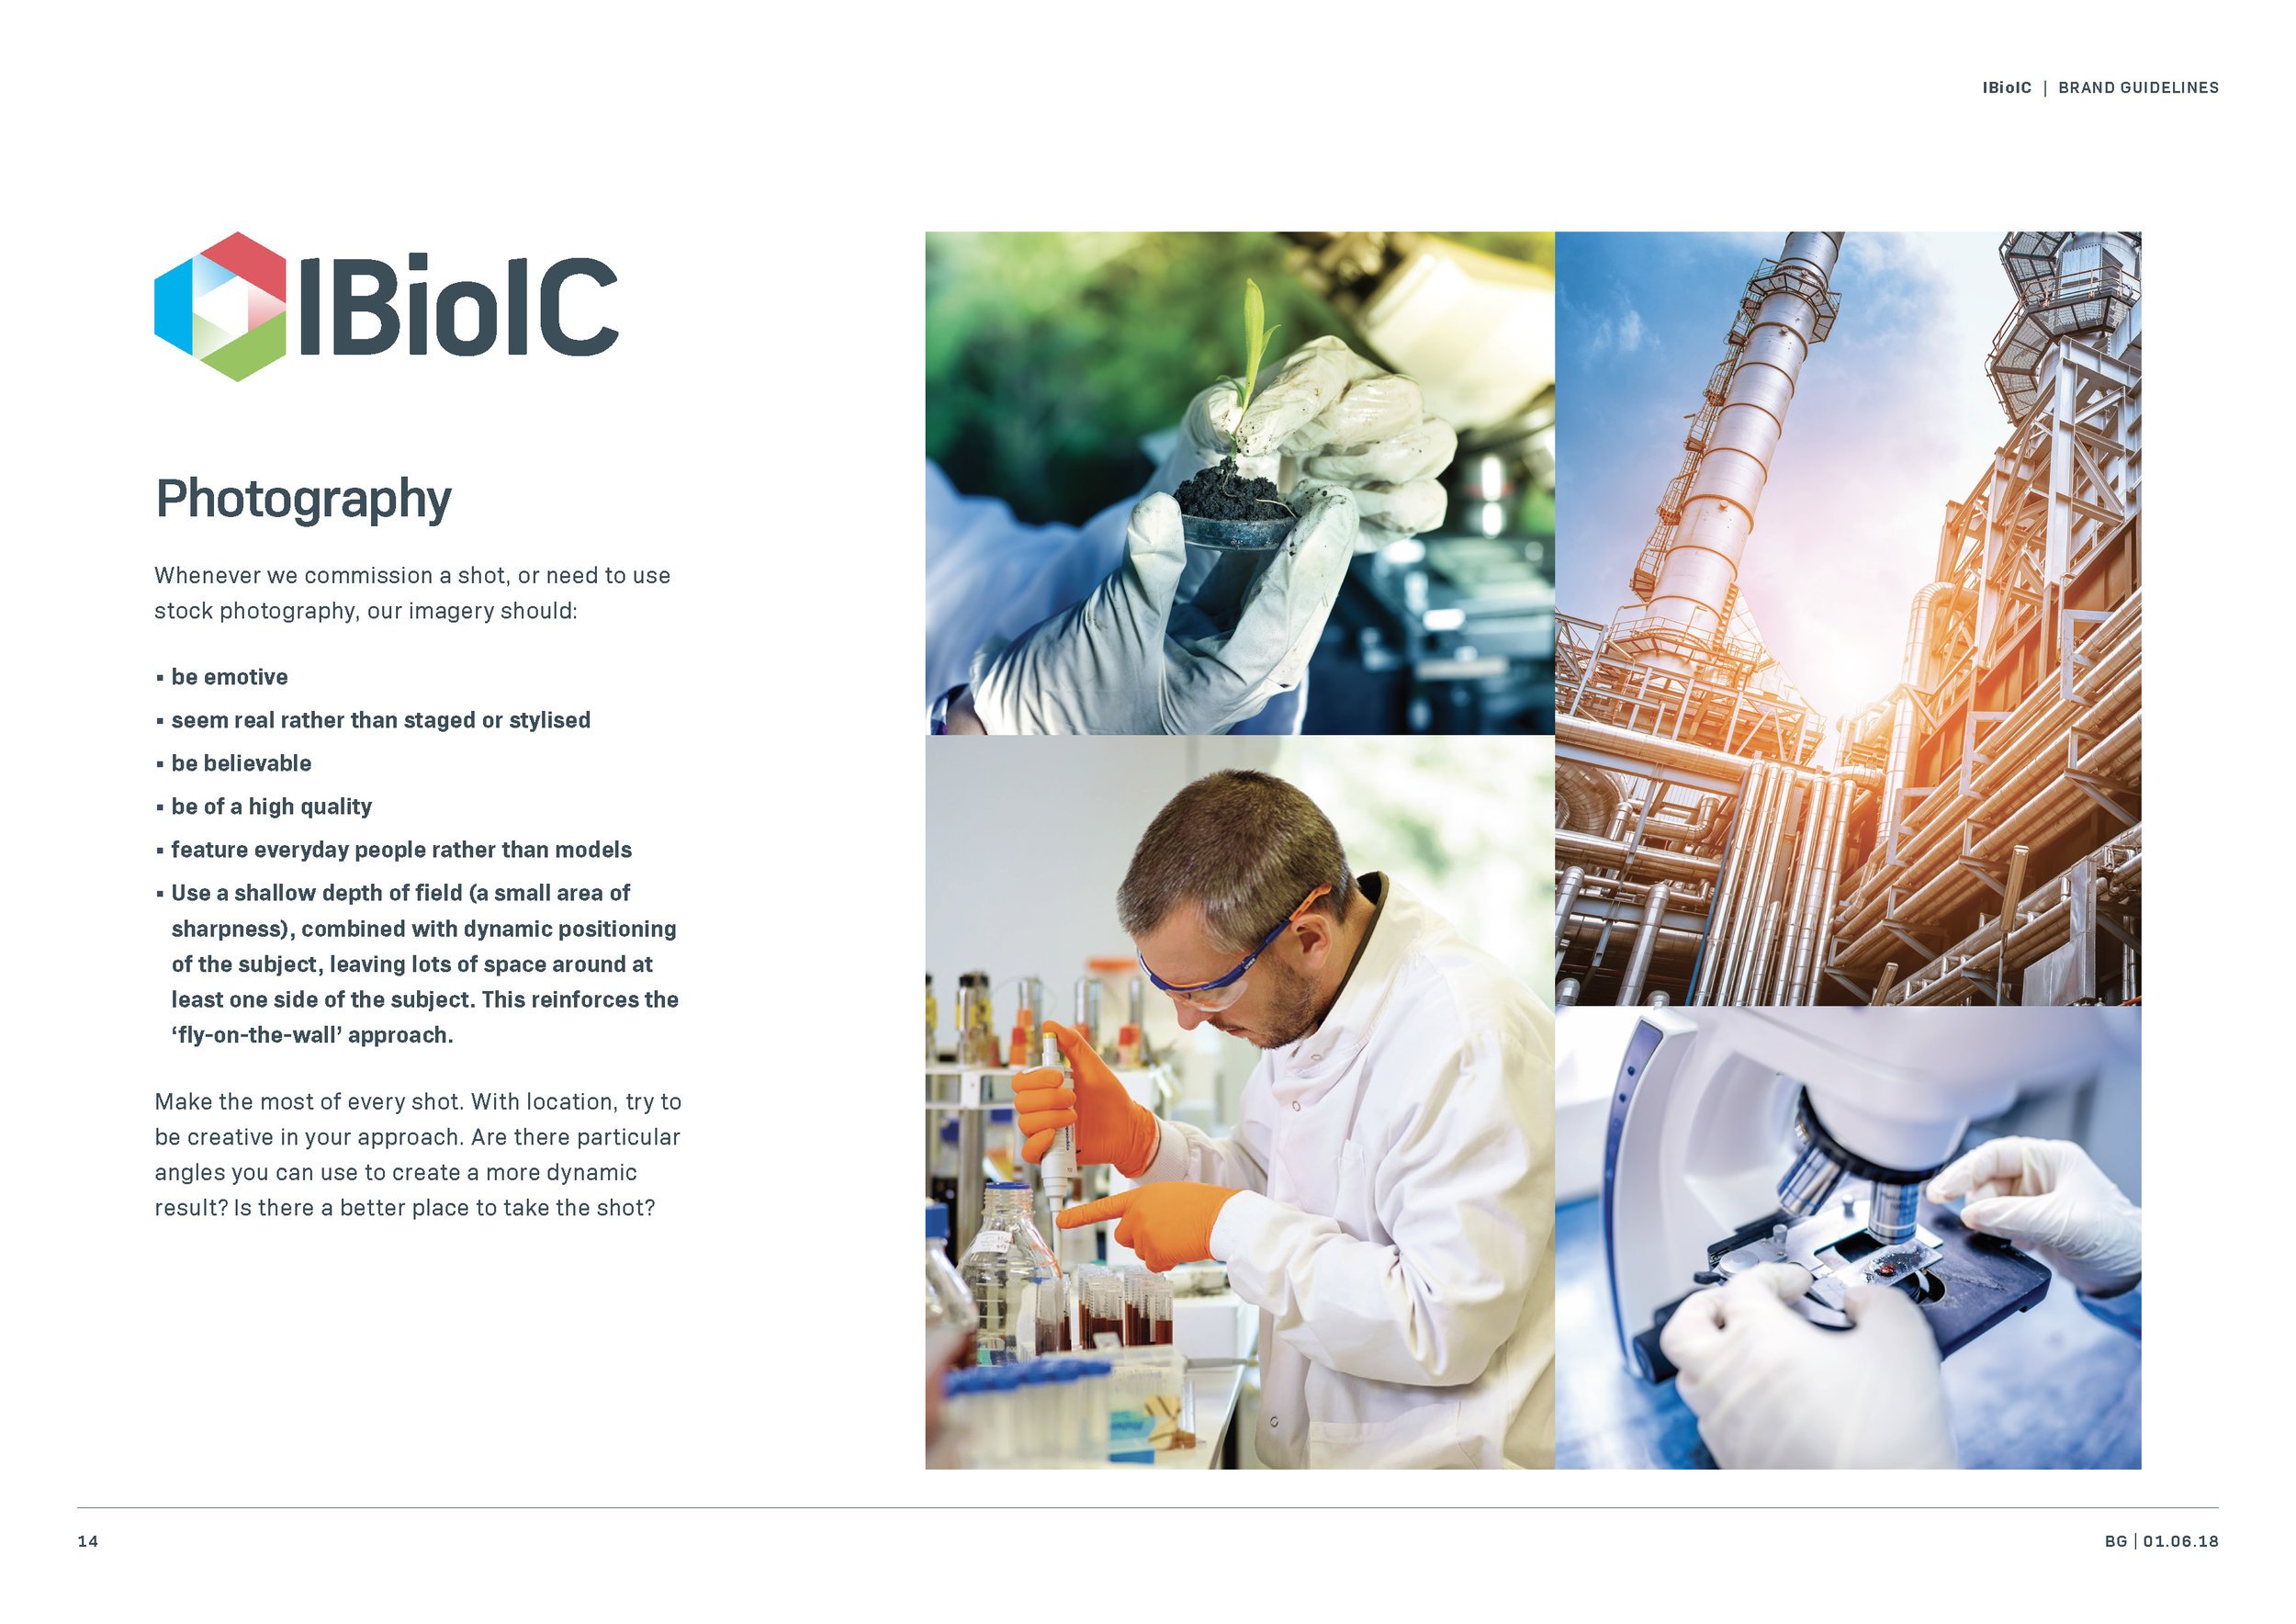 IbioIC brand guidelines designed by TwoFifths Design